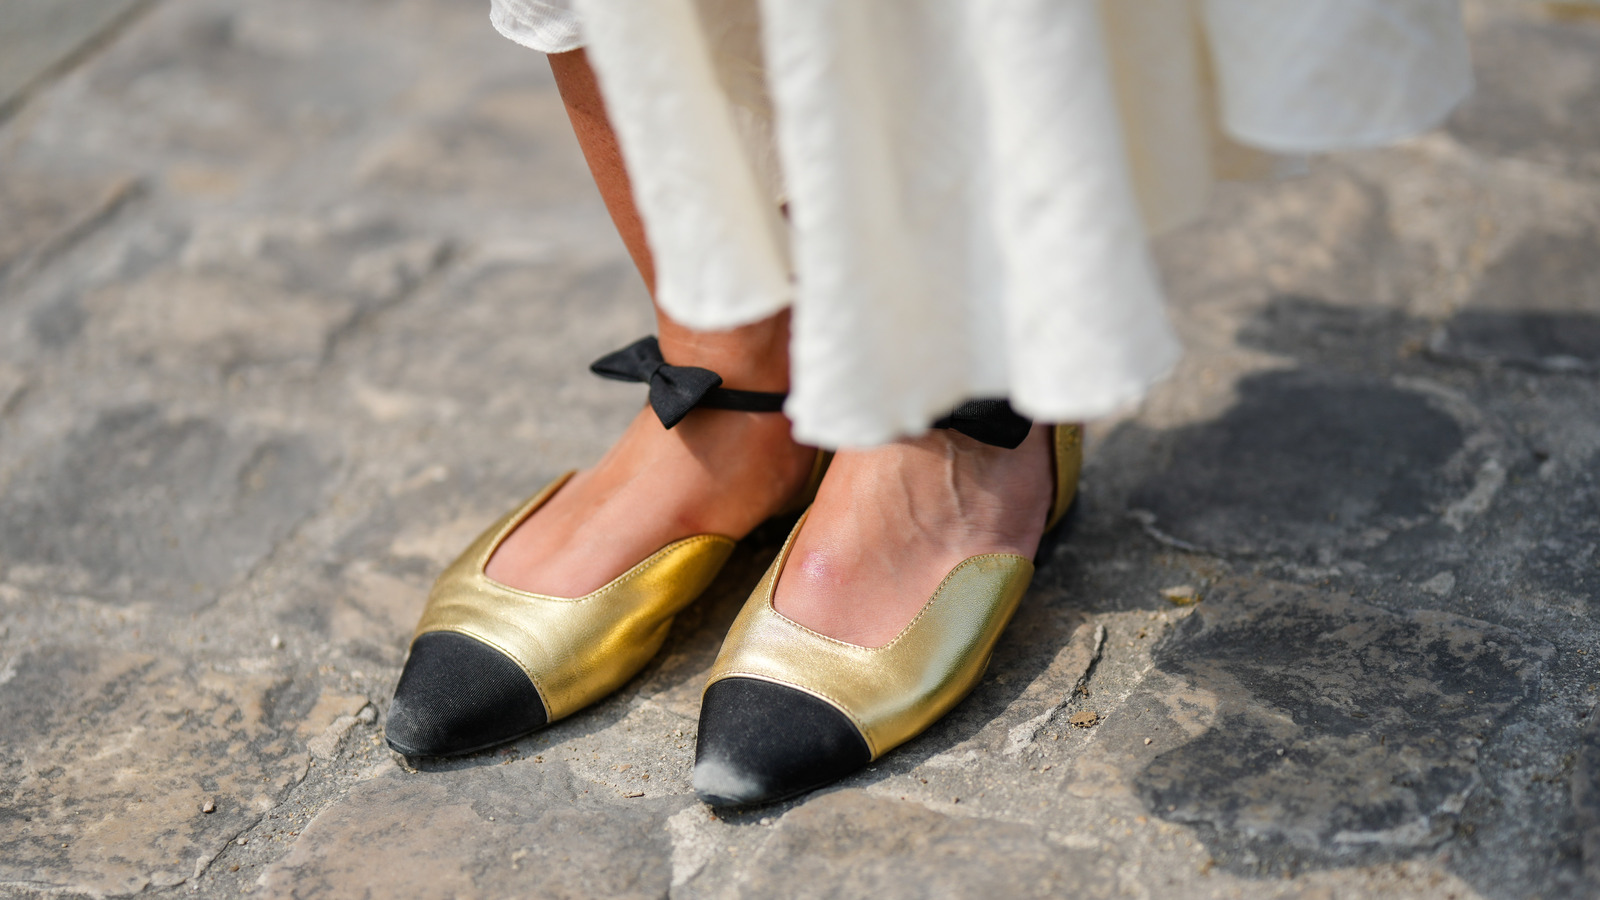 The most stylish ballet flats to add to your wardrobe now